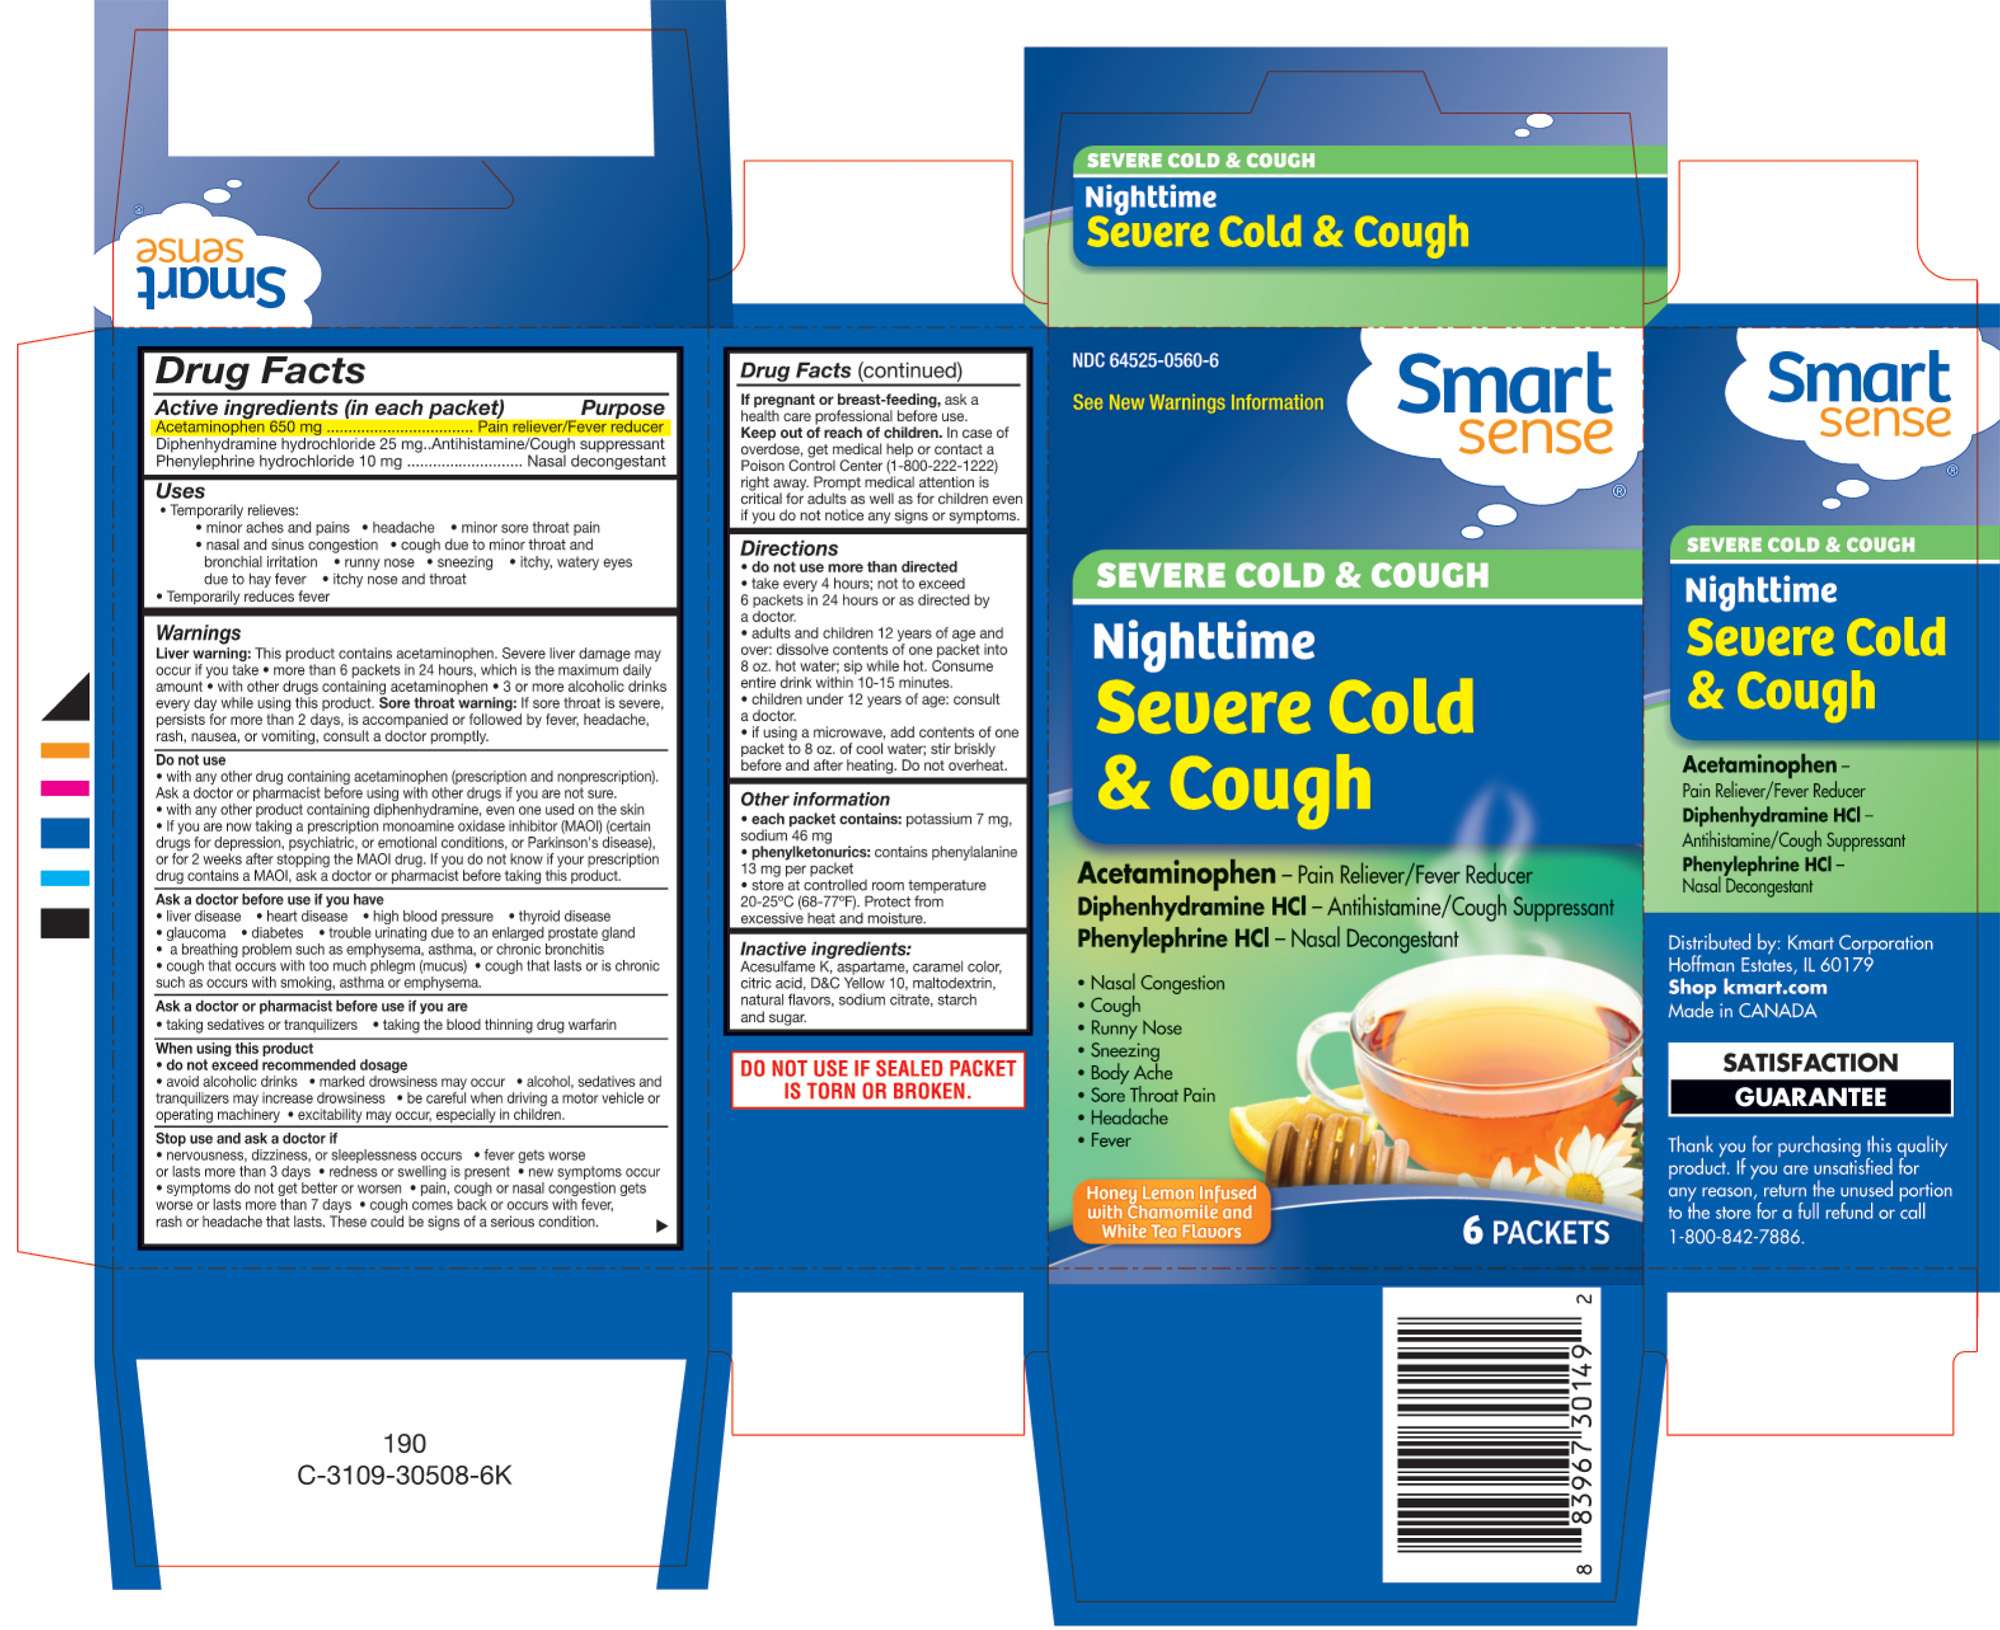 Smart sense Nighttime Severe Cold and Cough